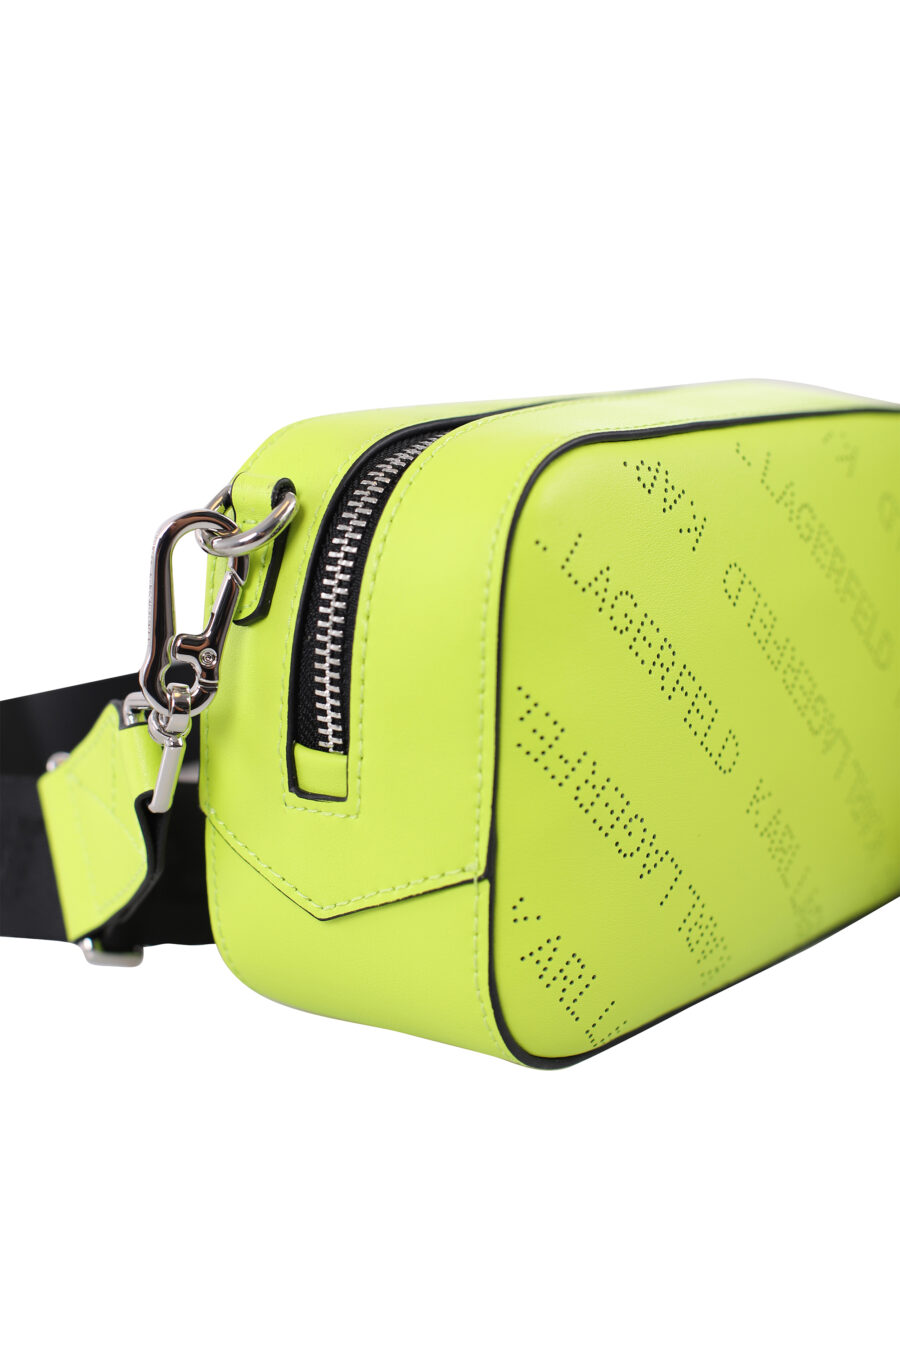 Lime green shoulder bag with perforated logo - IMG 1758